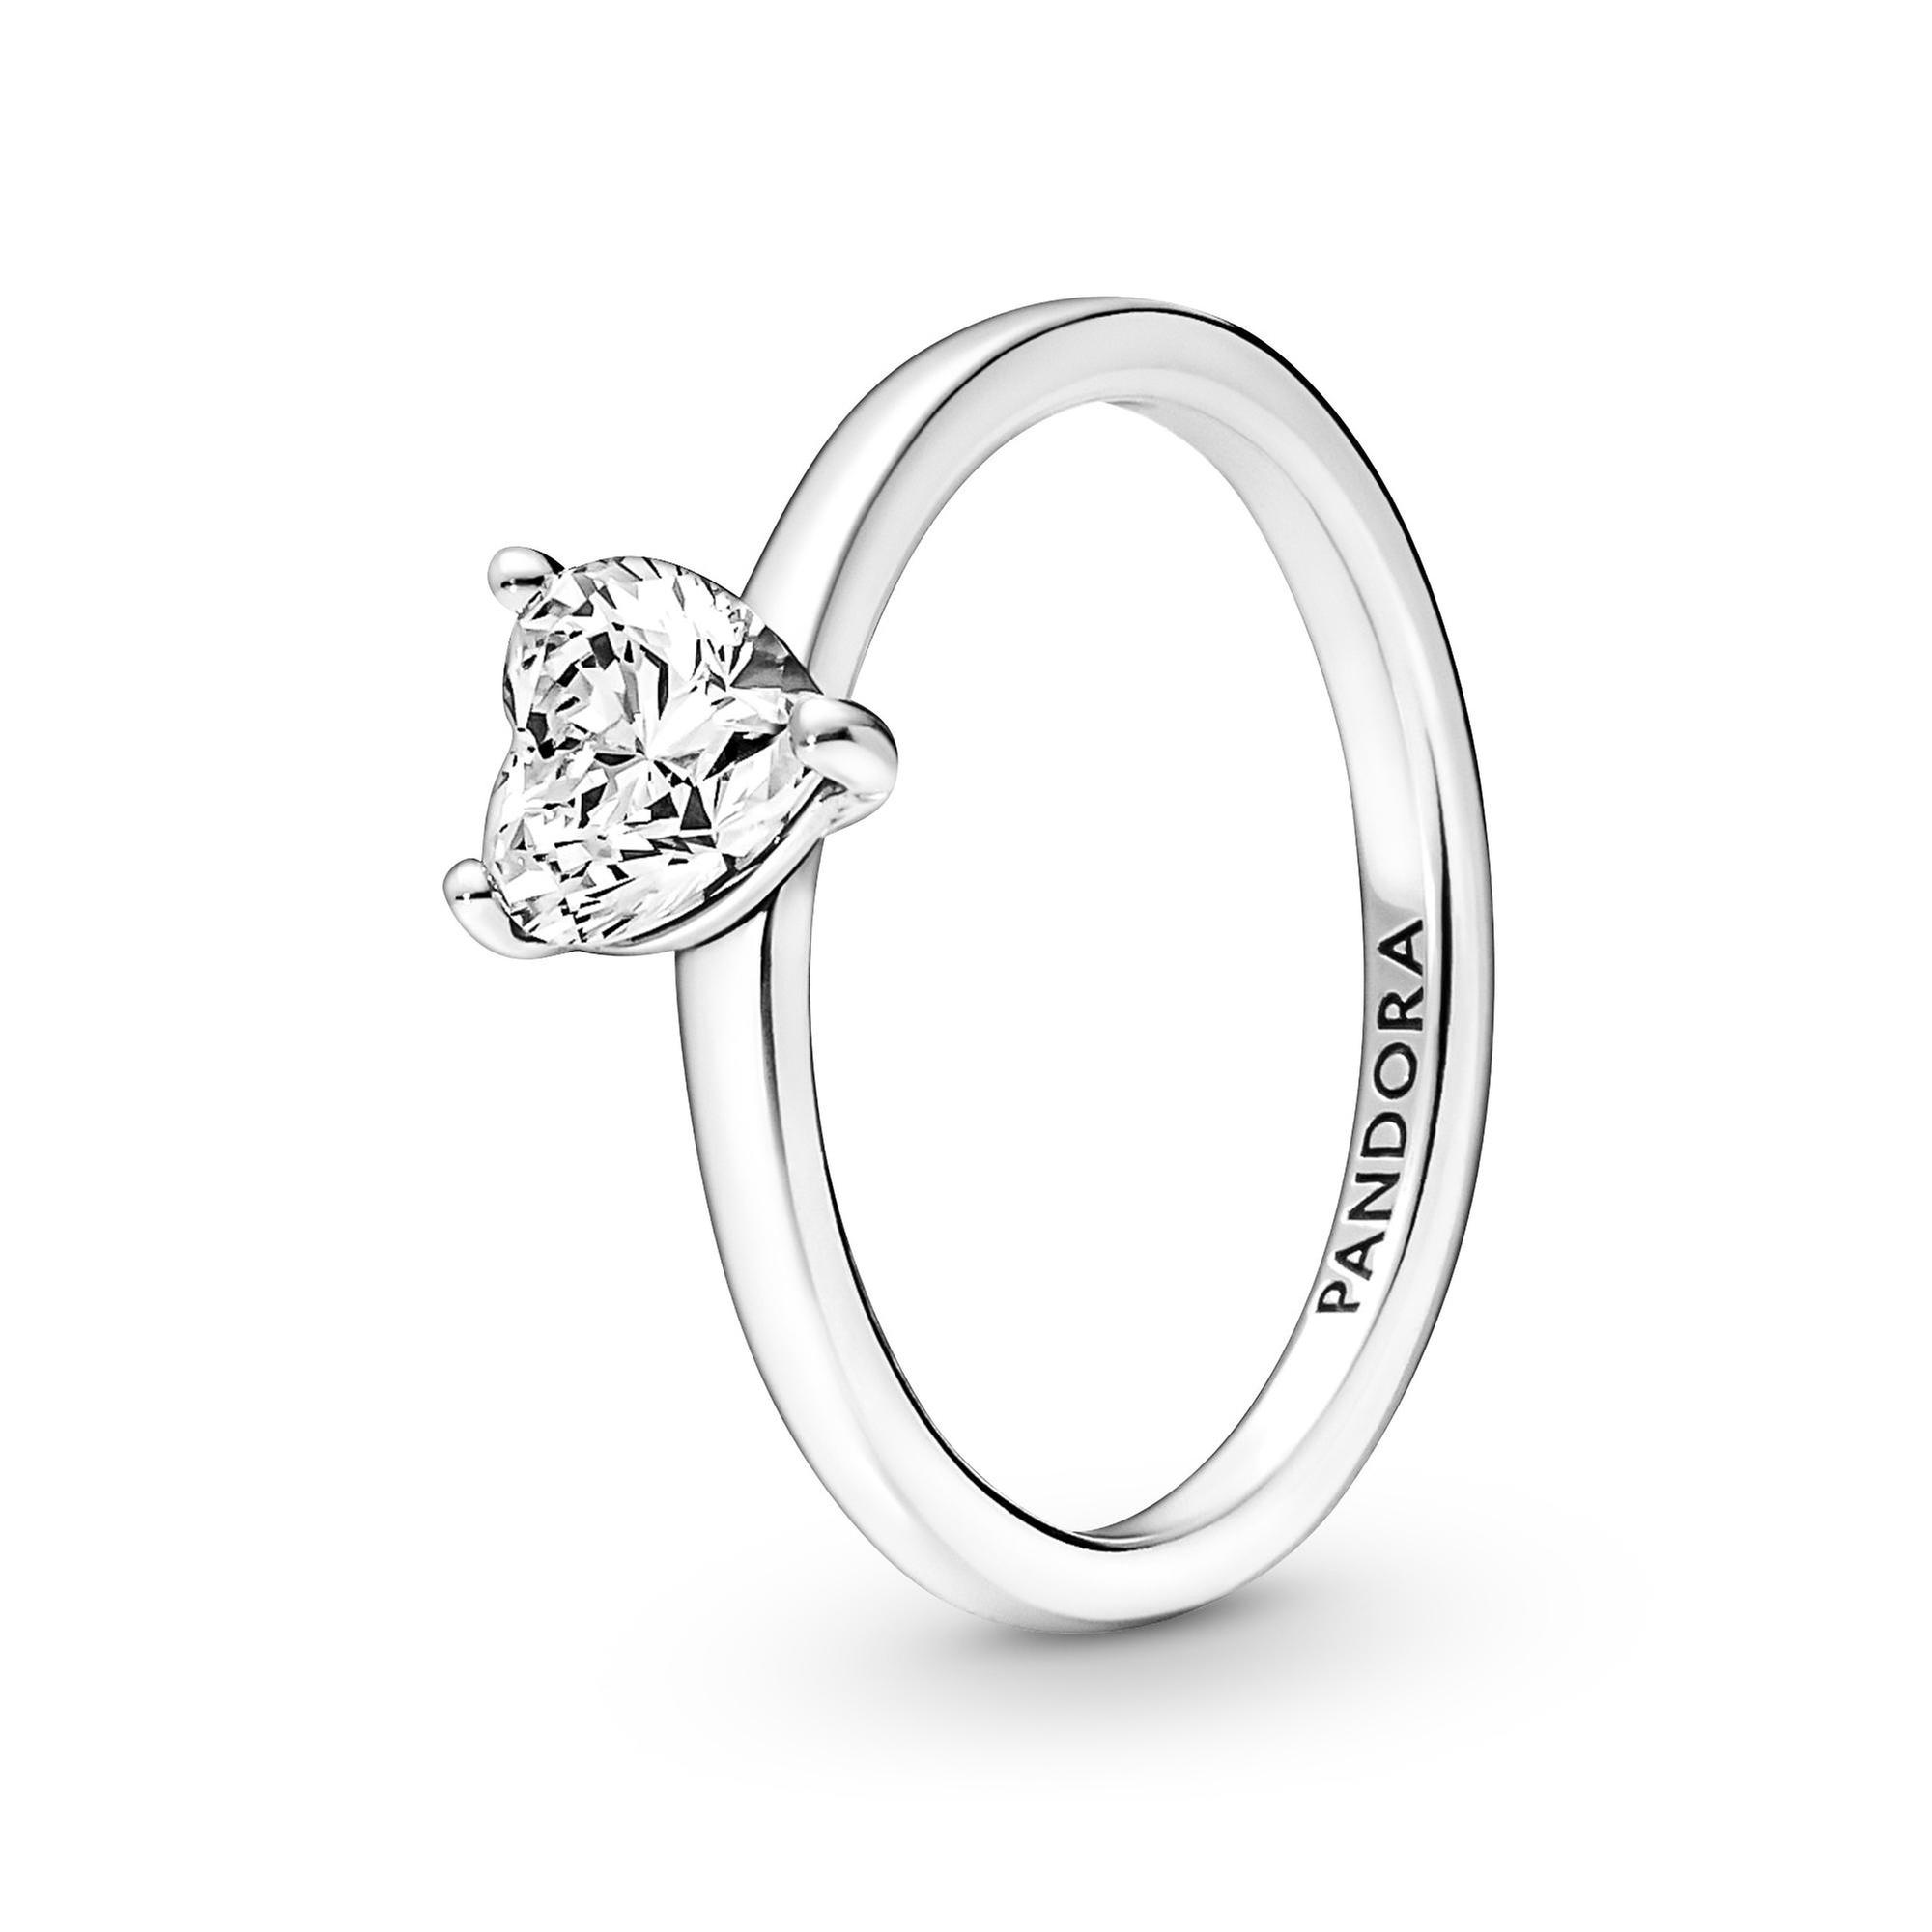 Pandora Sparkling Heart Solitaire Ring - Size 7.5